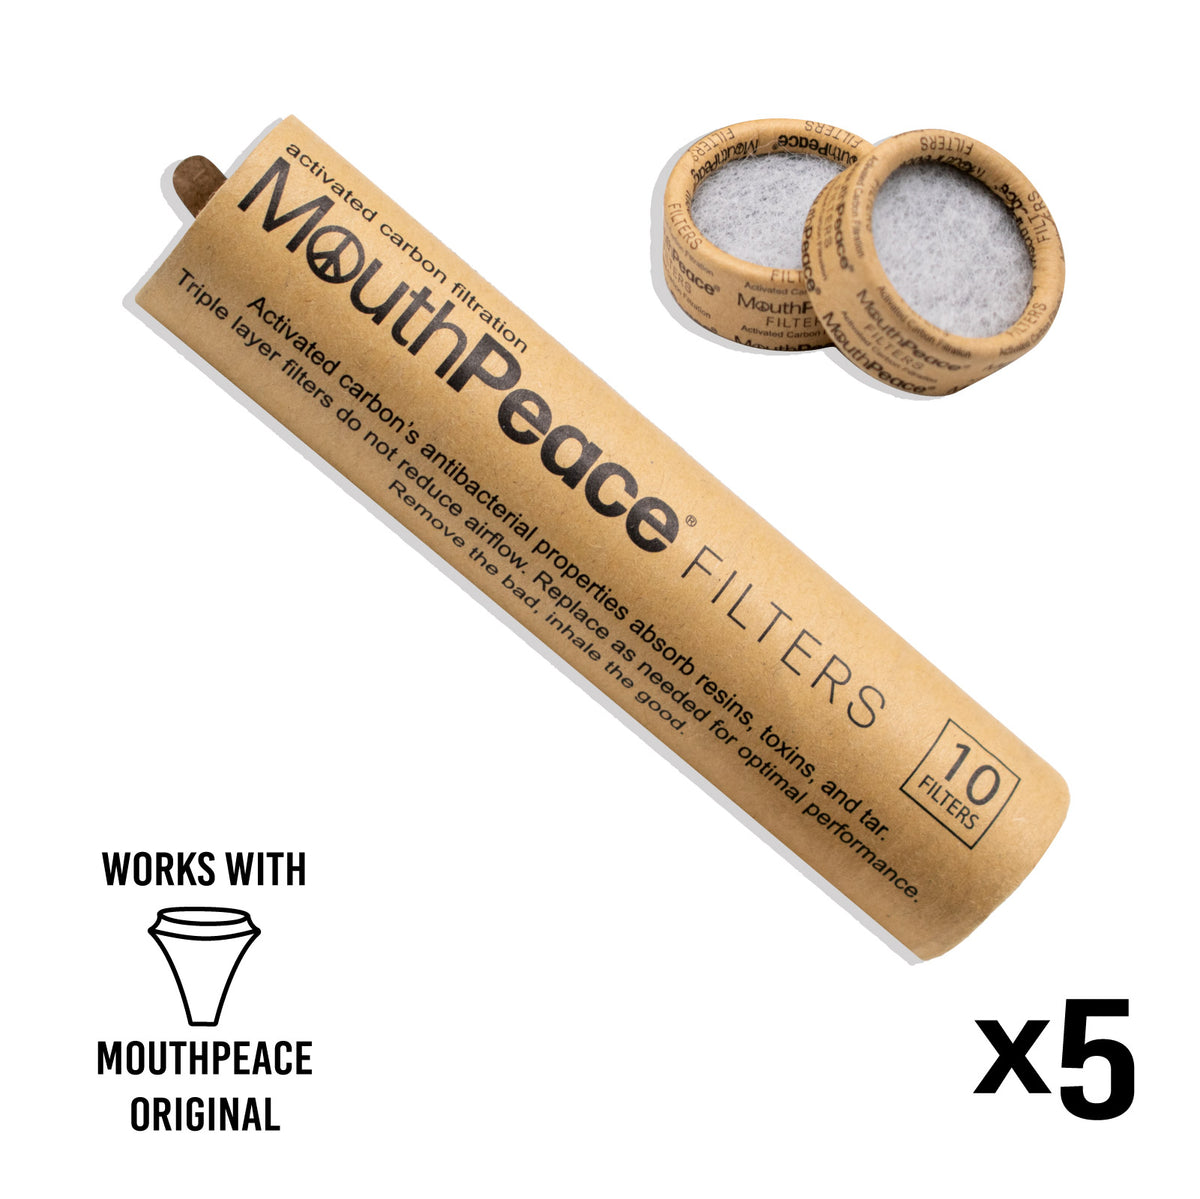 MouthPeace Carbon Filter Rolls x5